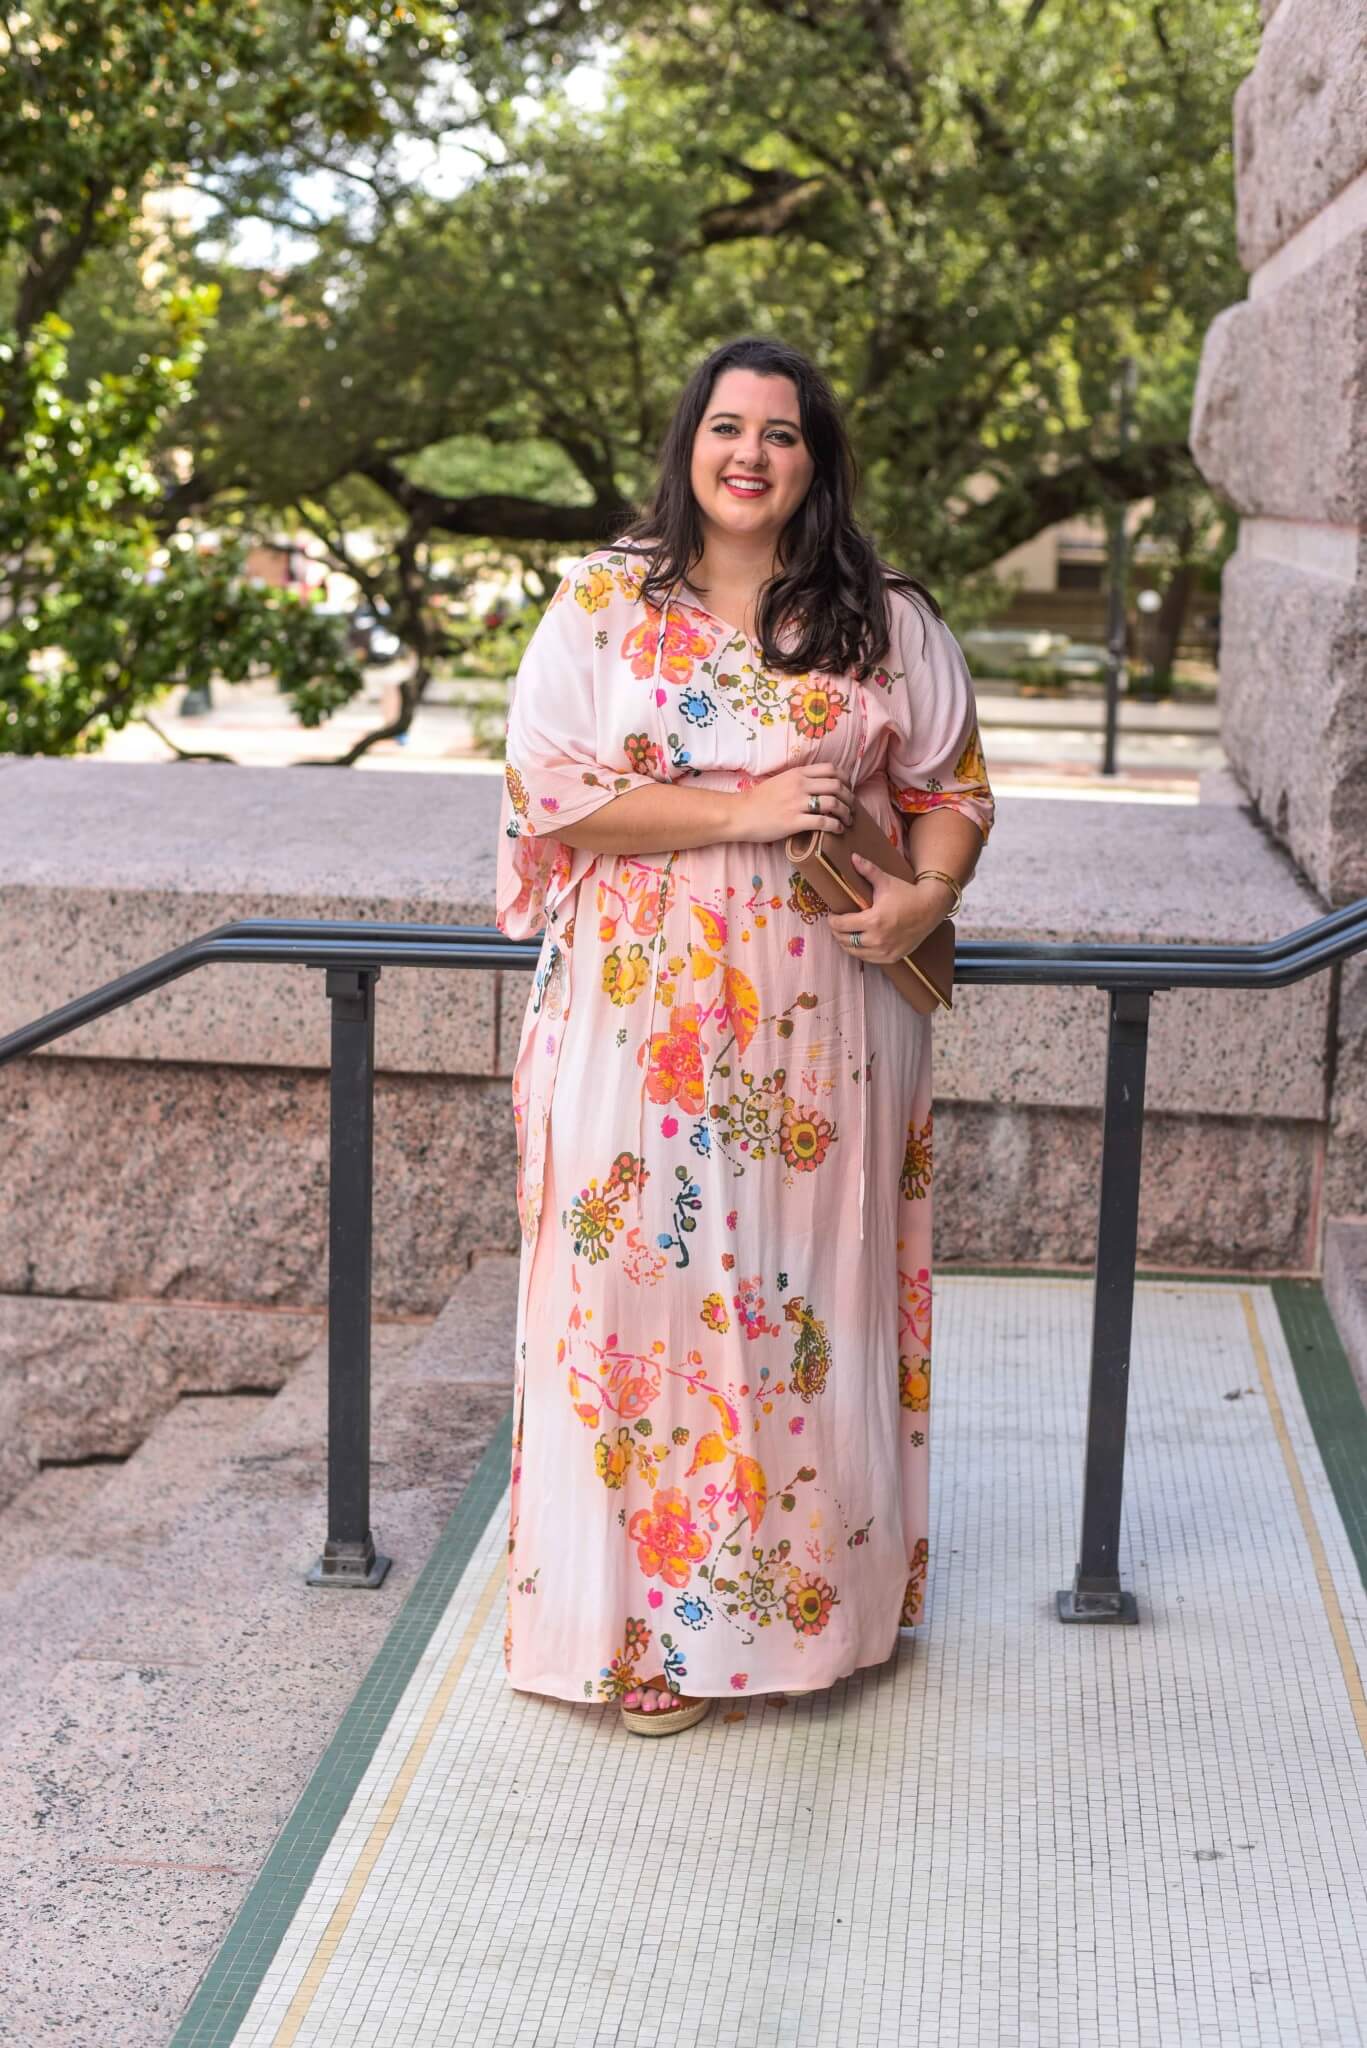 Looking for the perfect date night outfit? A beautiful printed maxi dress goes easily from day to night. #datenight #plussizefashion - Gwynnie Bee outfit by popular Houston fashion blogger Something Gold, Something Blue